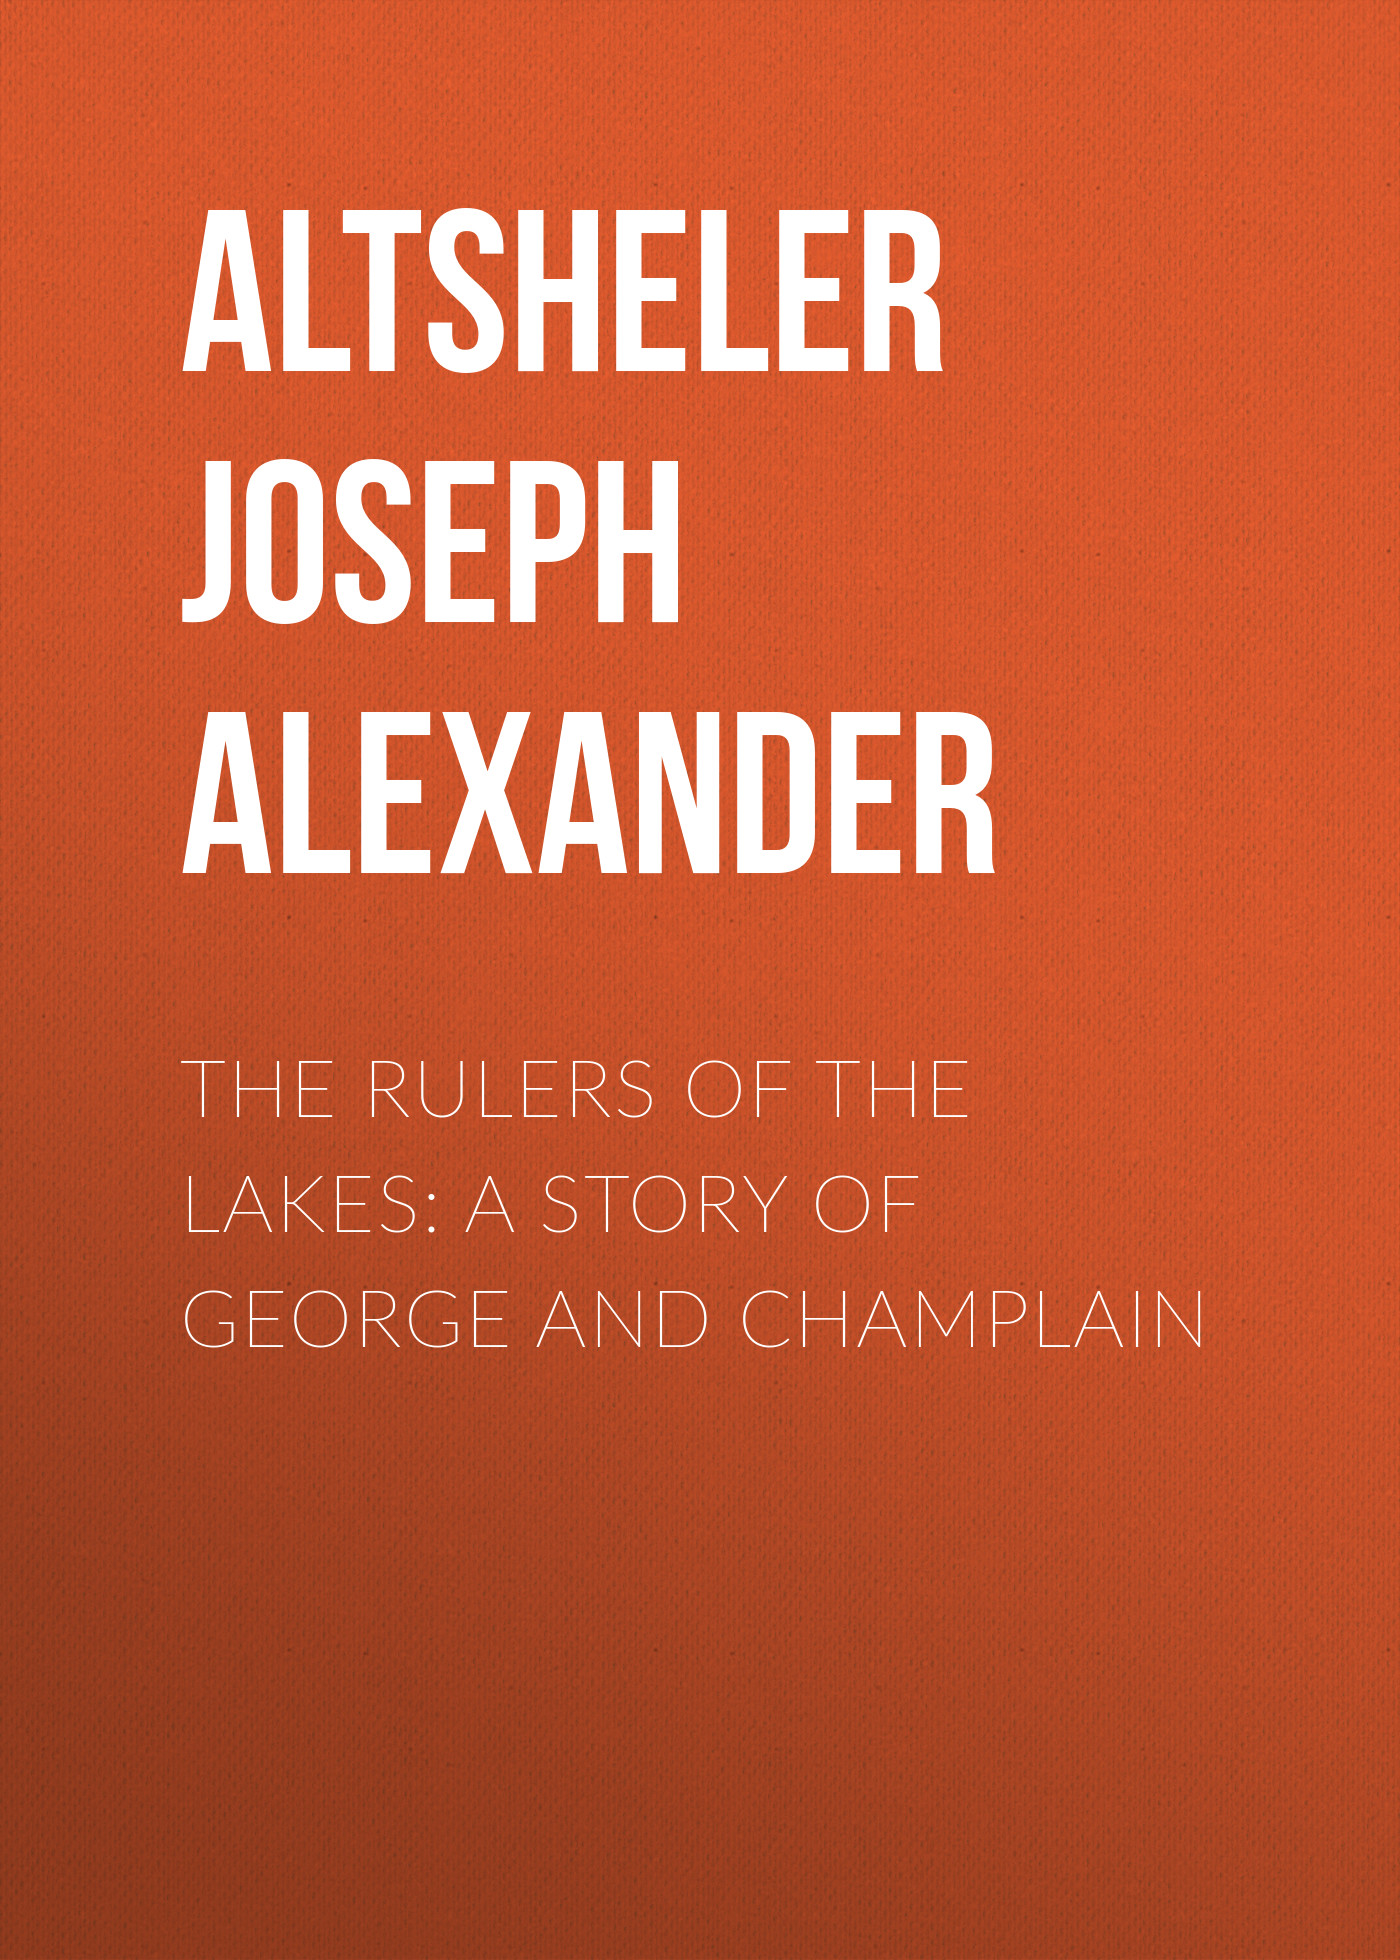 Altsheler Joseph Alexander The Rulers of the Lakes: A Story of George and Champlain